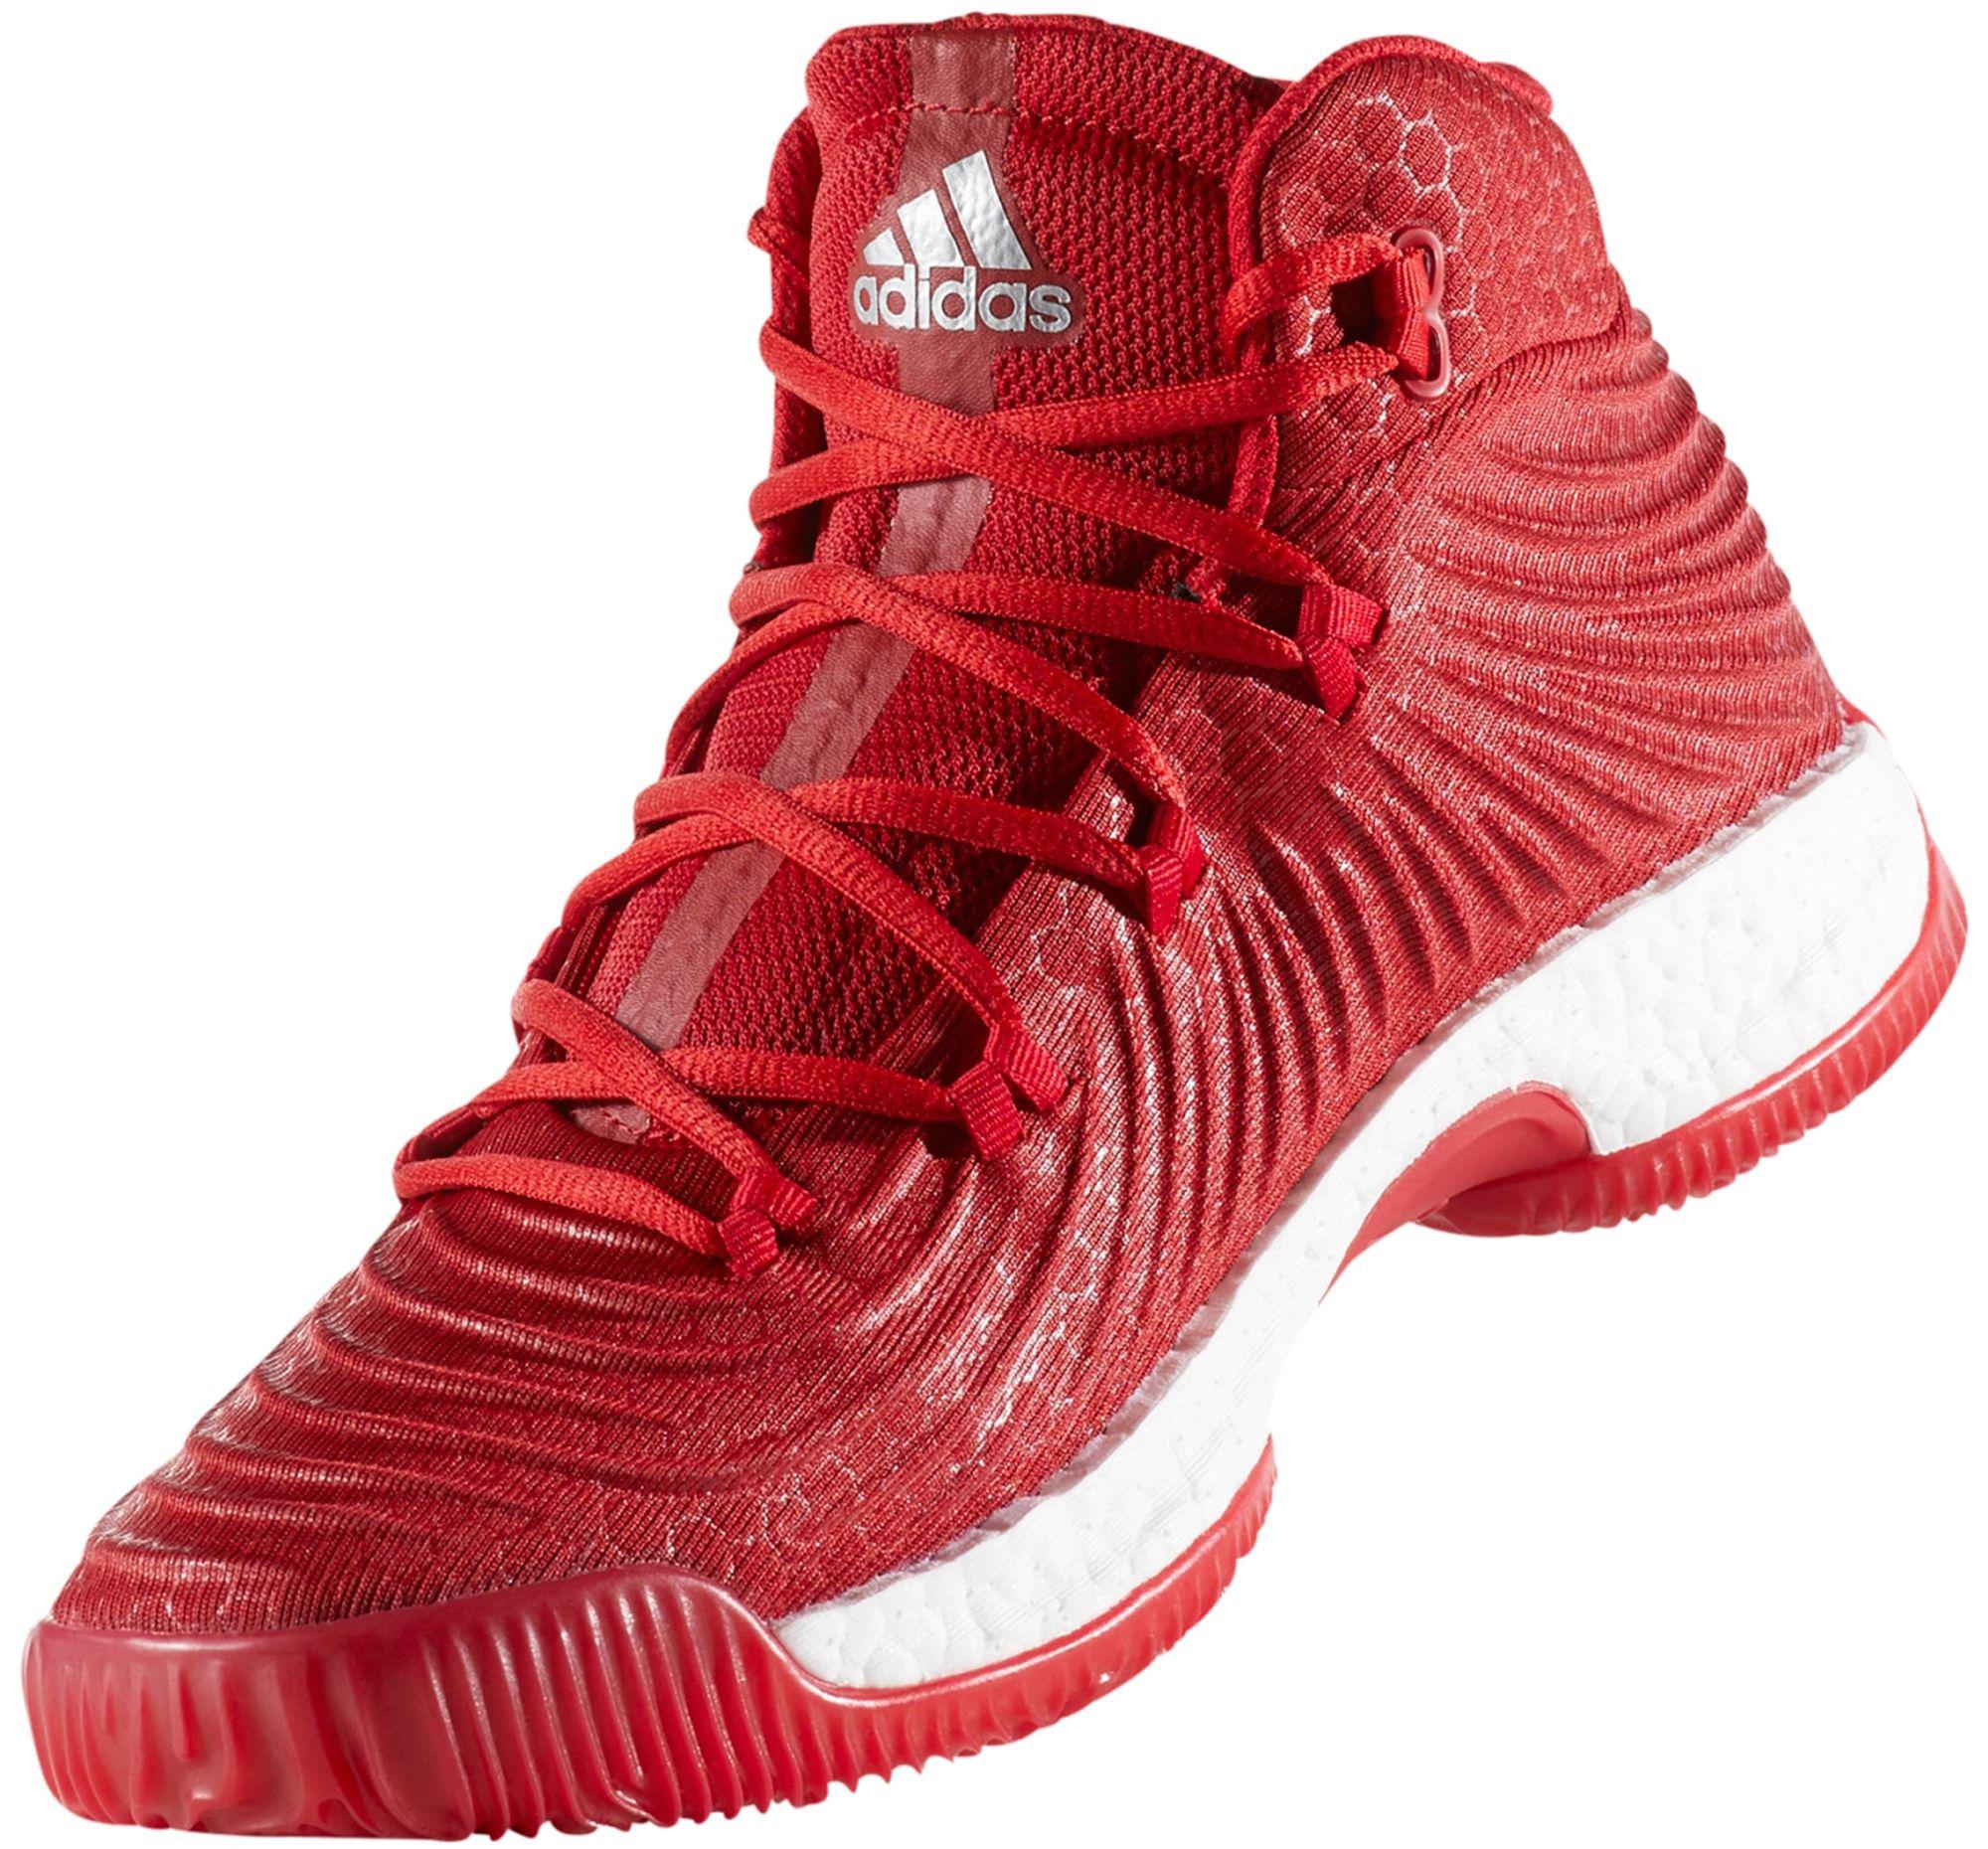 adidas Rubber Crazy Explosive 2017 Shoe Basketball in Red/Grey (Red ...